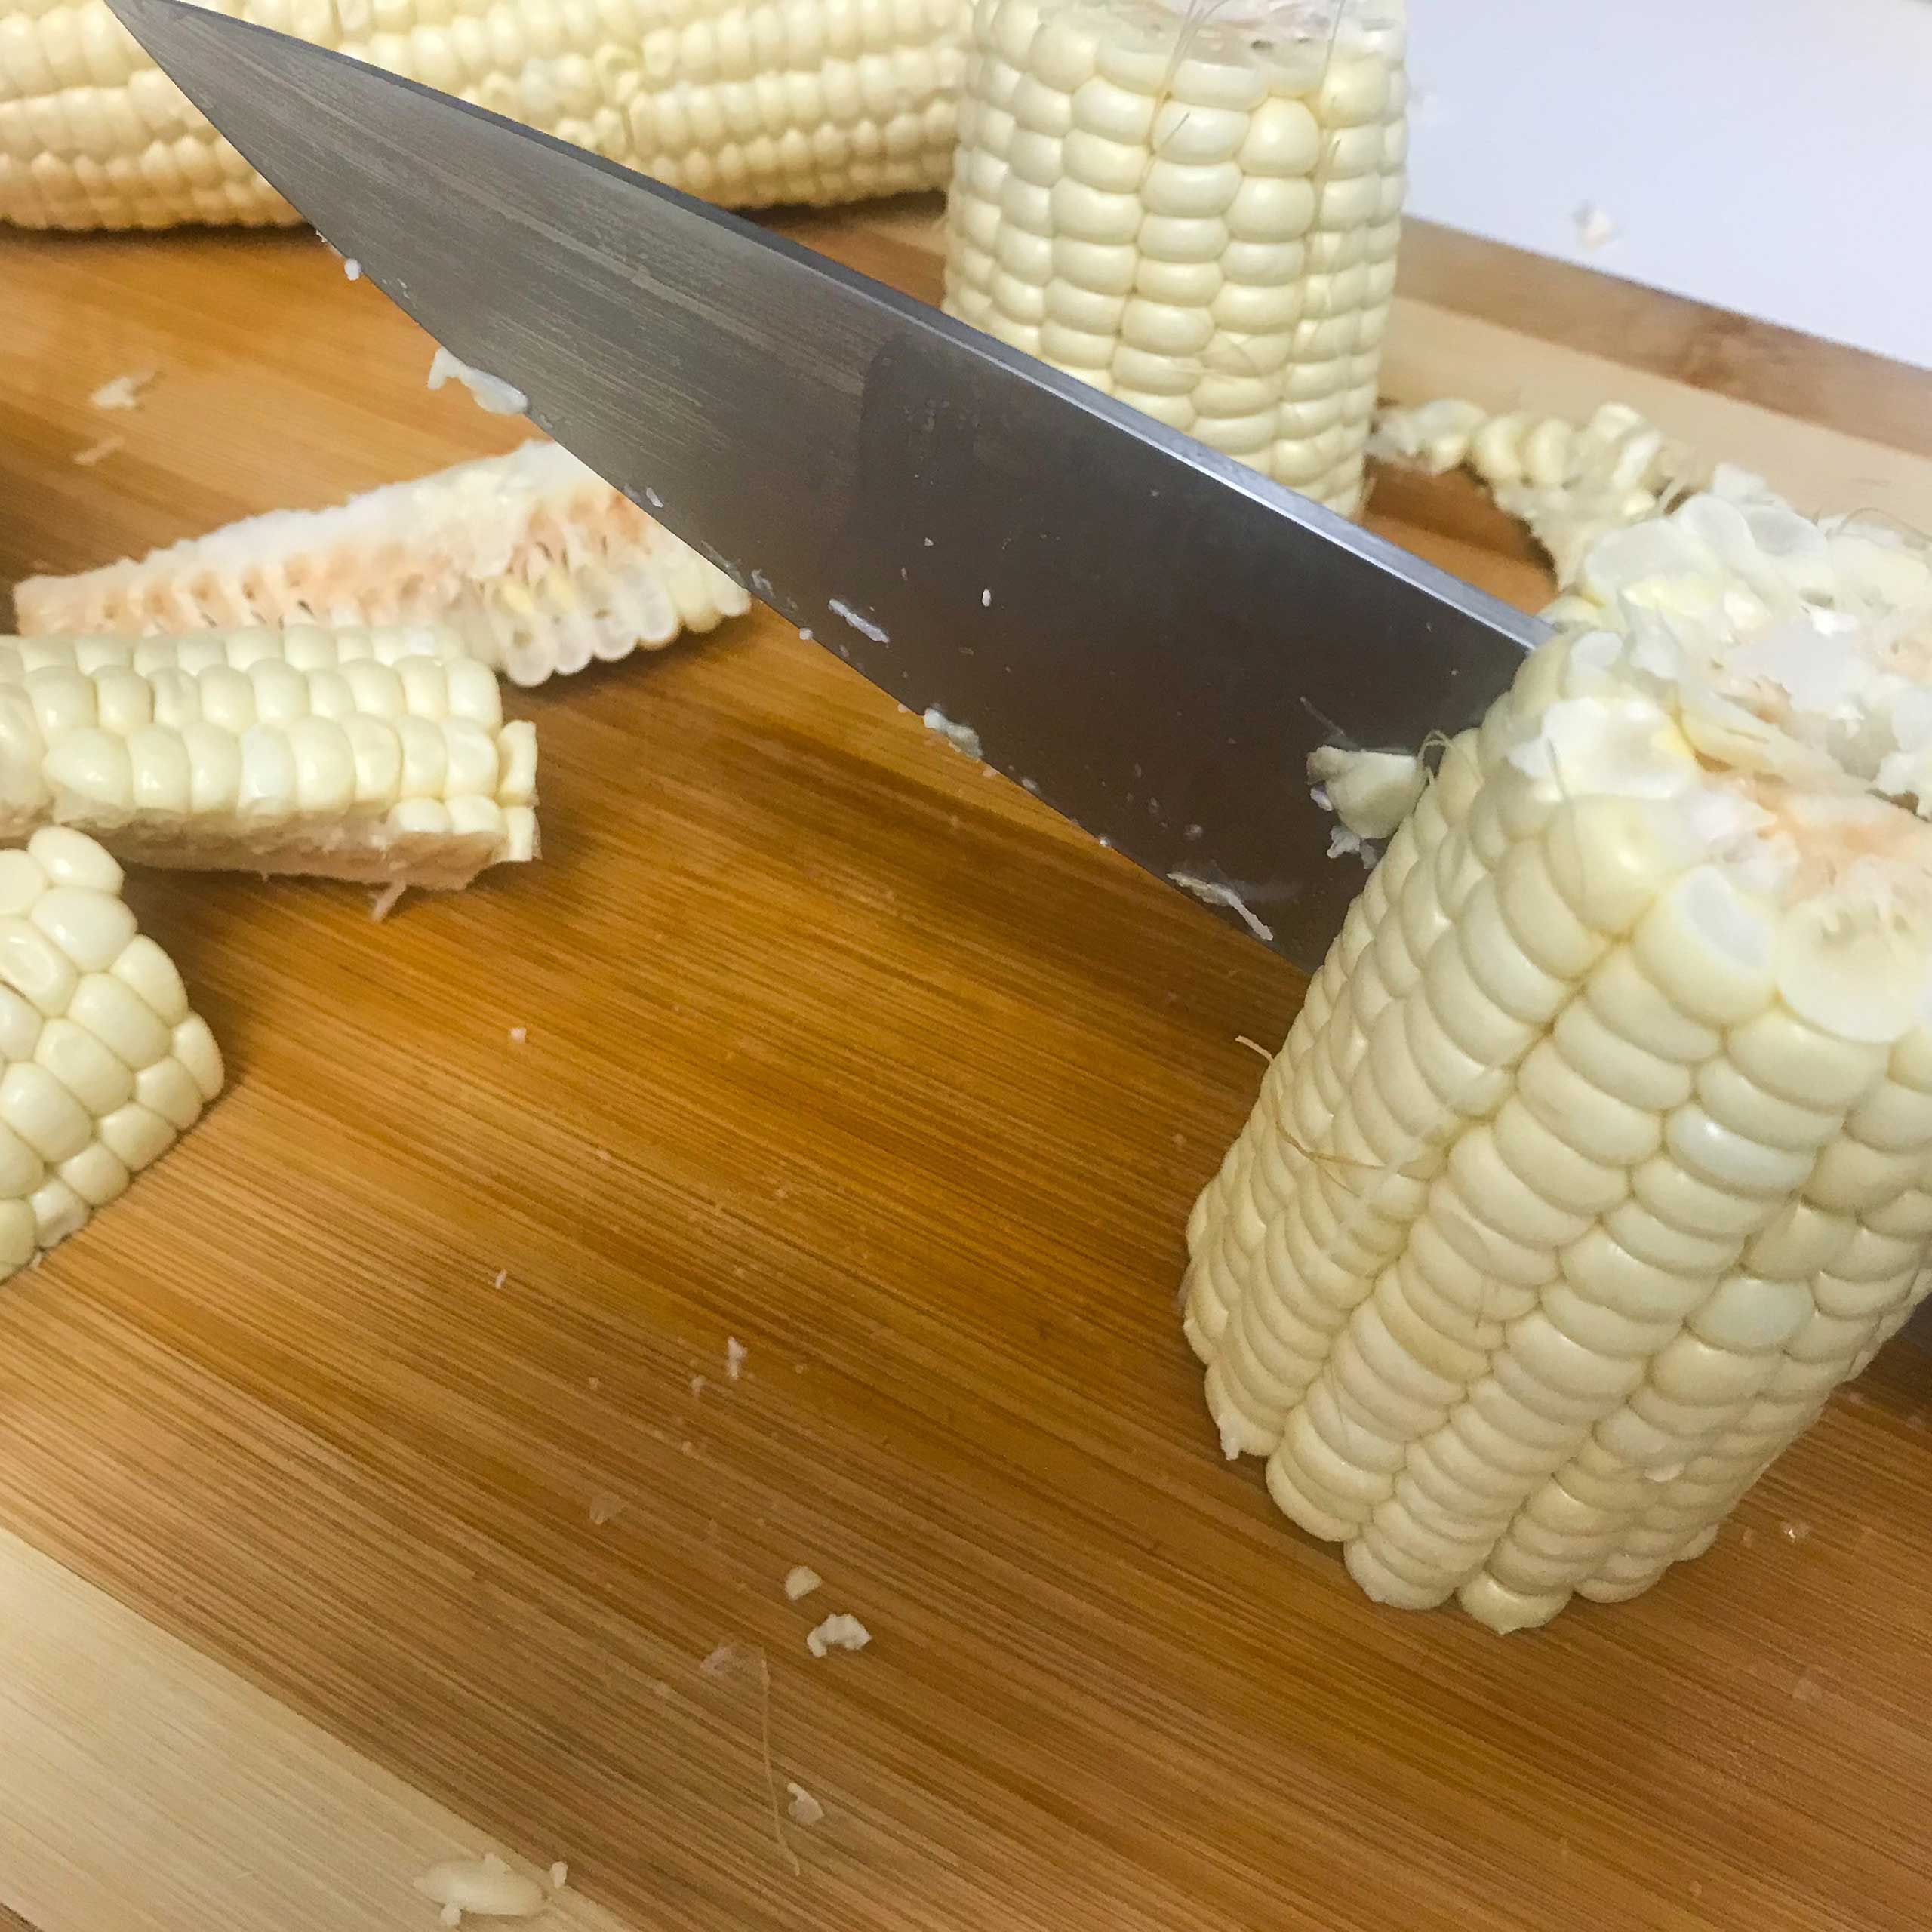 Cut corn cobs on a cutting board with a knife